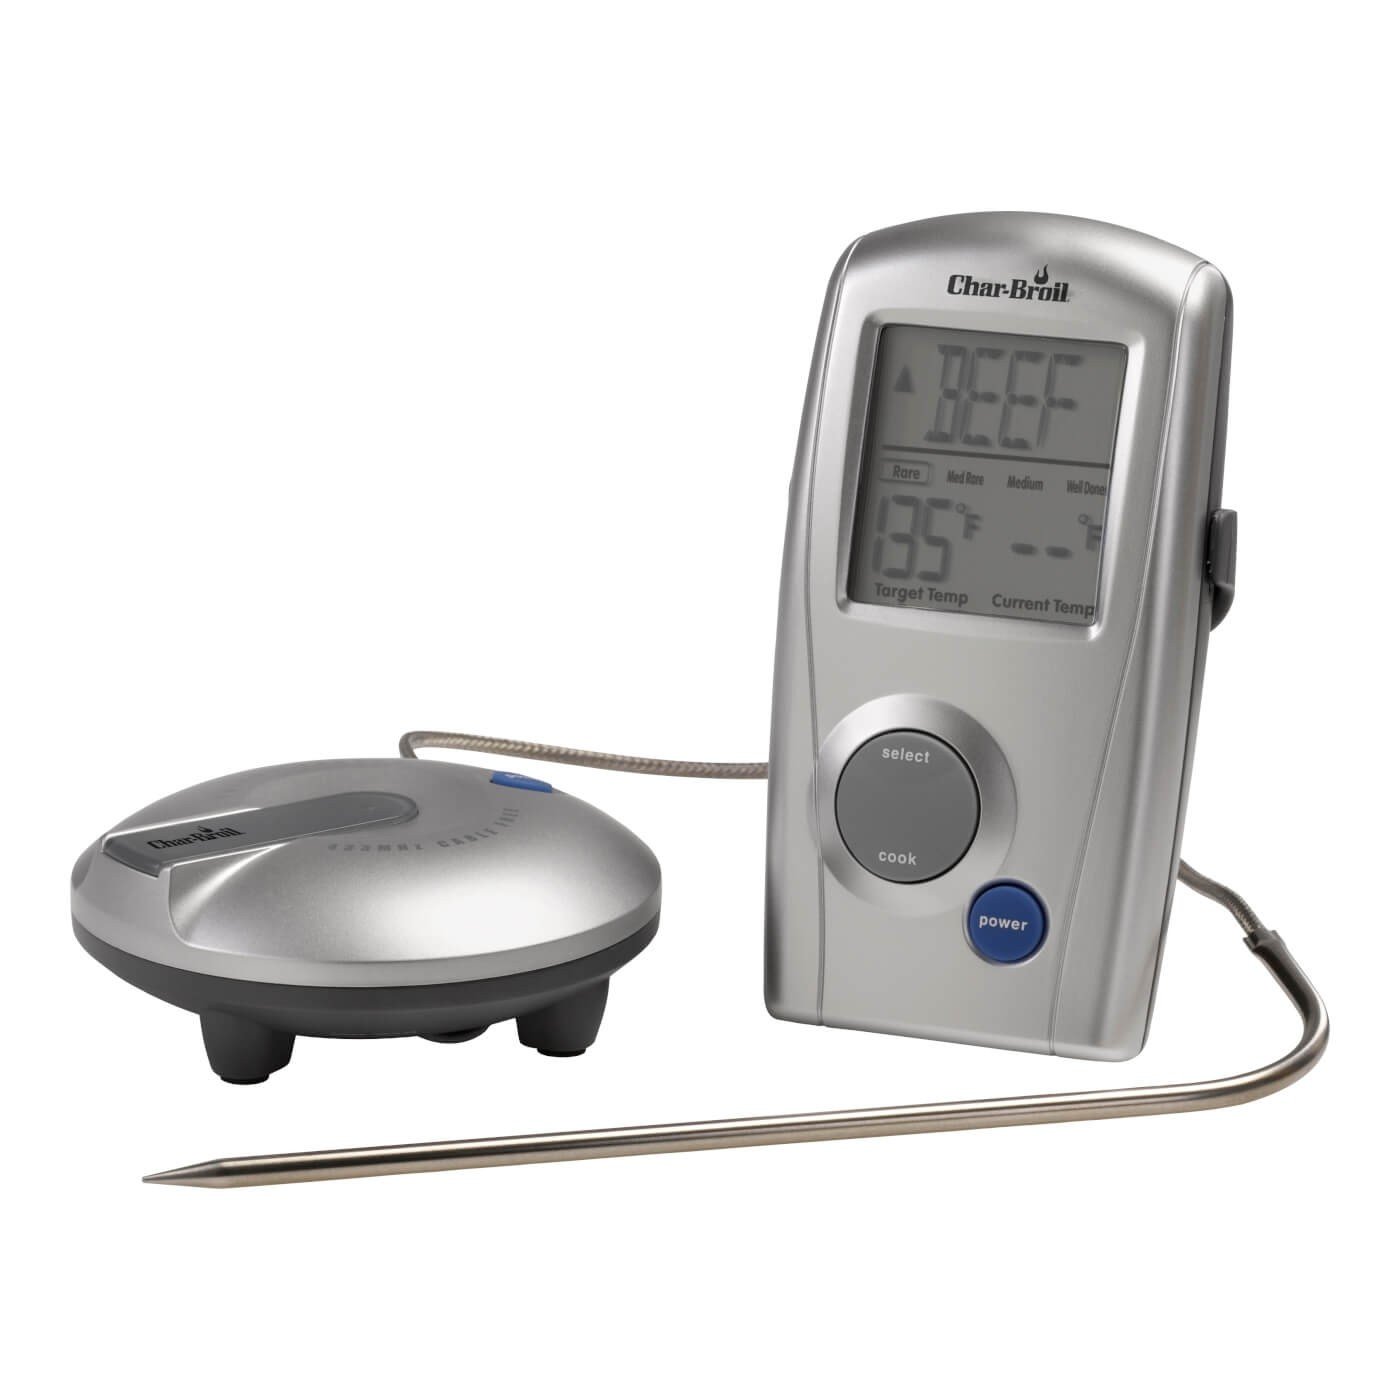 Char-Broil - Digital Thermometer (140558)